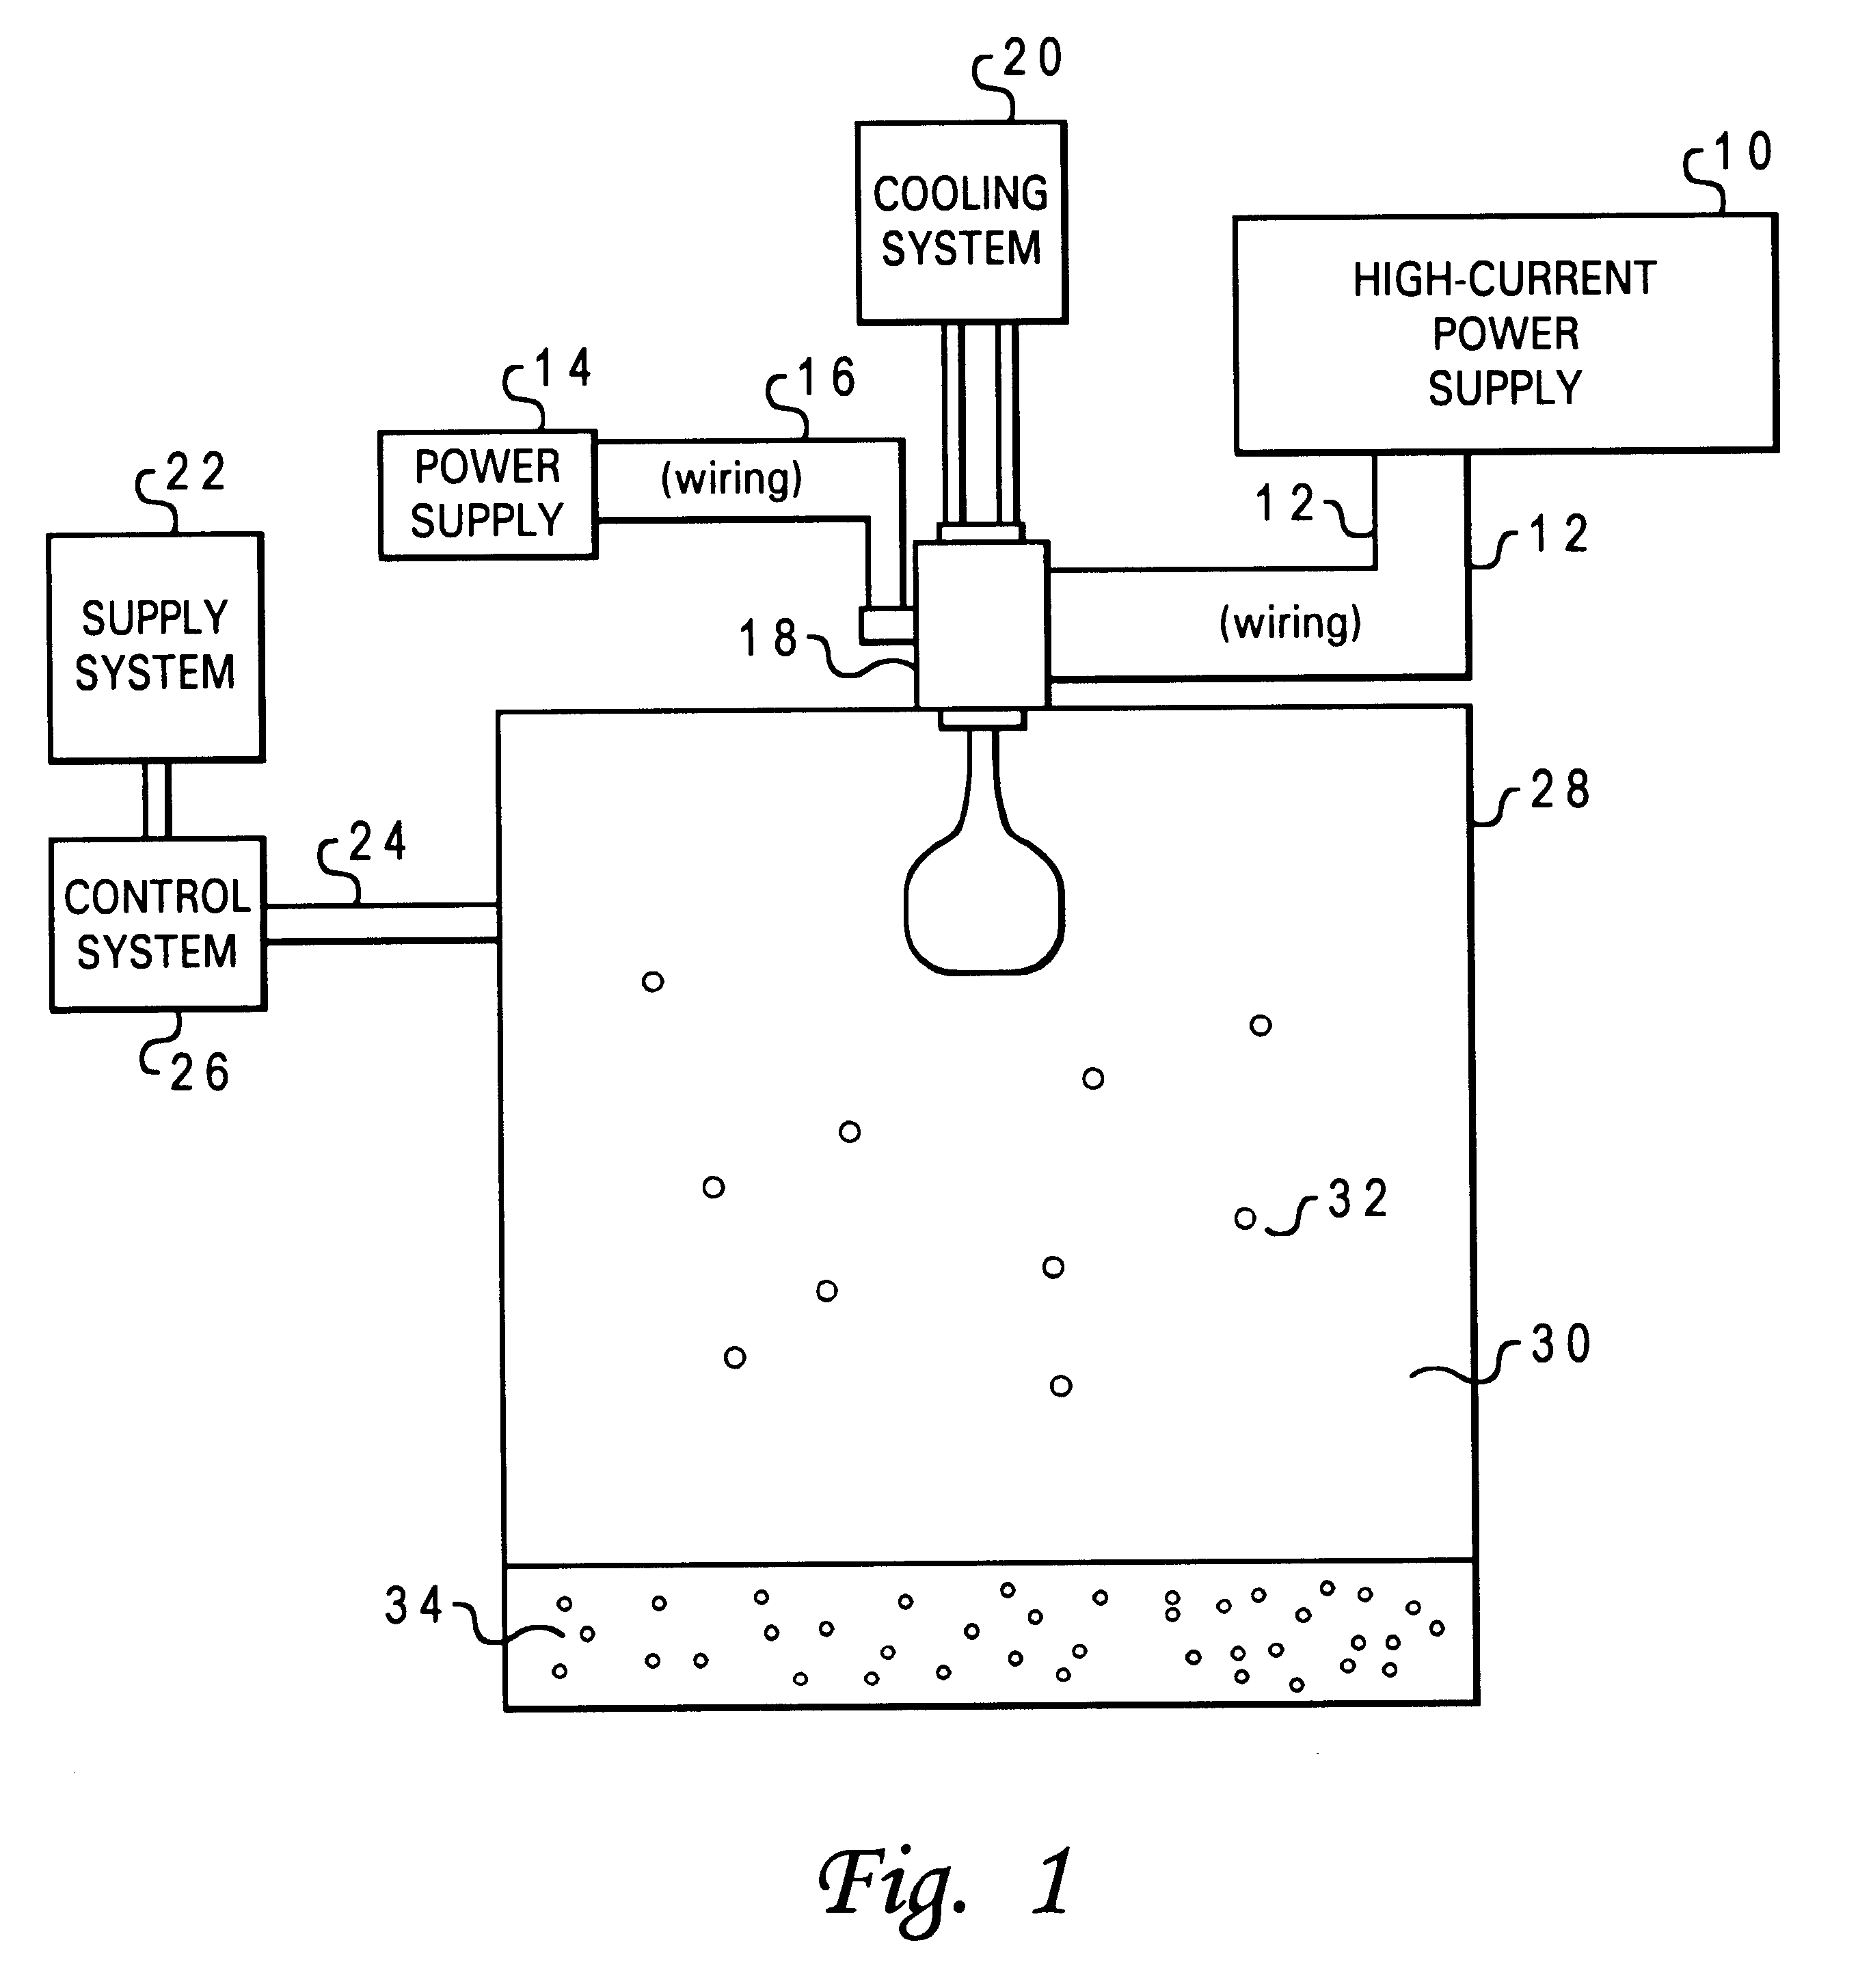 Method and apparatus for direct electrothermal-physical conversion of ceramic into nanopowder